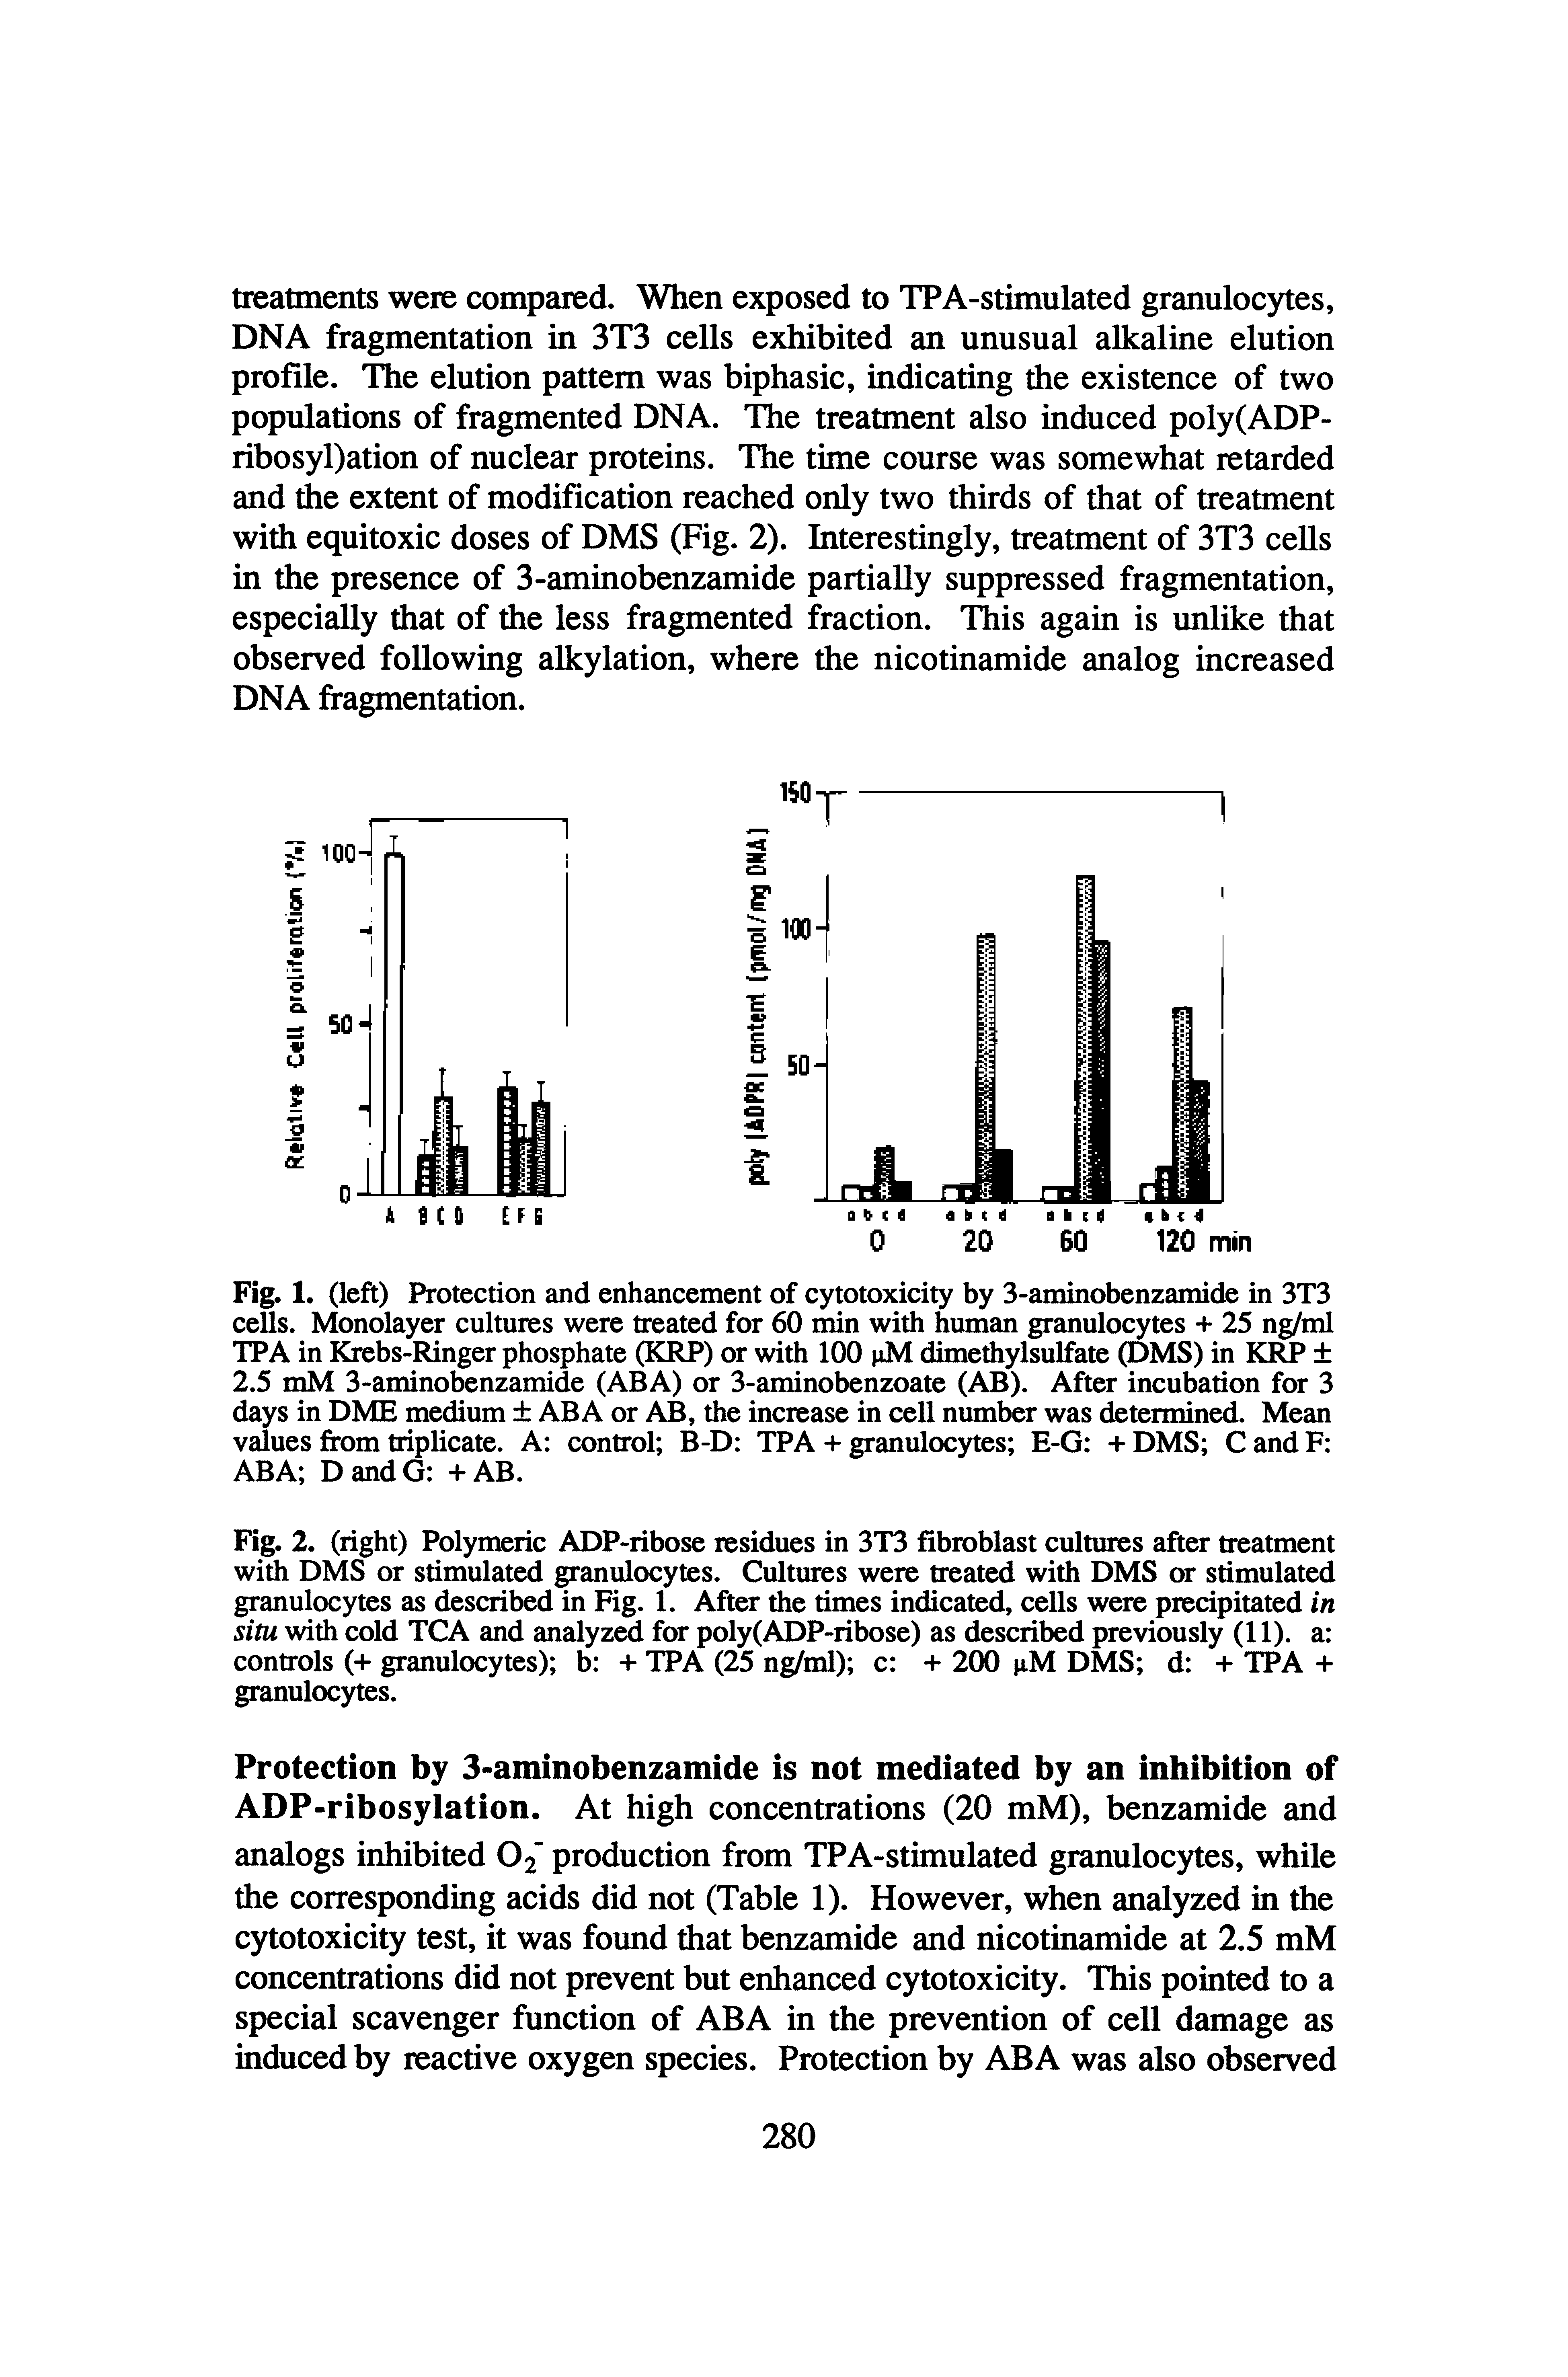 Fig. 2. (light) Polymeric ADP-ribose residues in 3T3 fibroblast cultures after treatment with DMS or stimulated granulocytes. Cultures were treated with DMS or stimulated granulocytes as described in Fig. 1. After the times indicated, cells were precipitated in situ with cold TCA and analyz for poly(ADP-ribose) as described previously (11). a controls (+ granulocytes) b + TPA (25 ng/ml) c + 200 jiM DMS d + TPA + granuloc s.